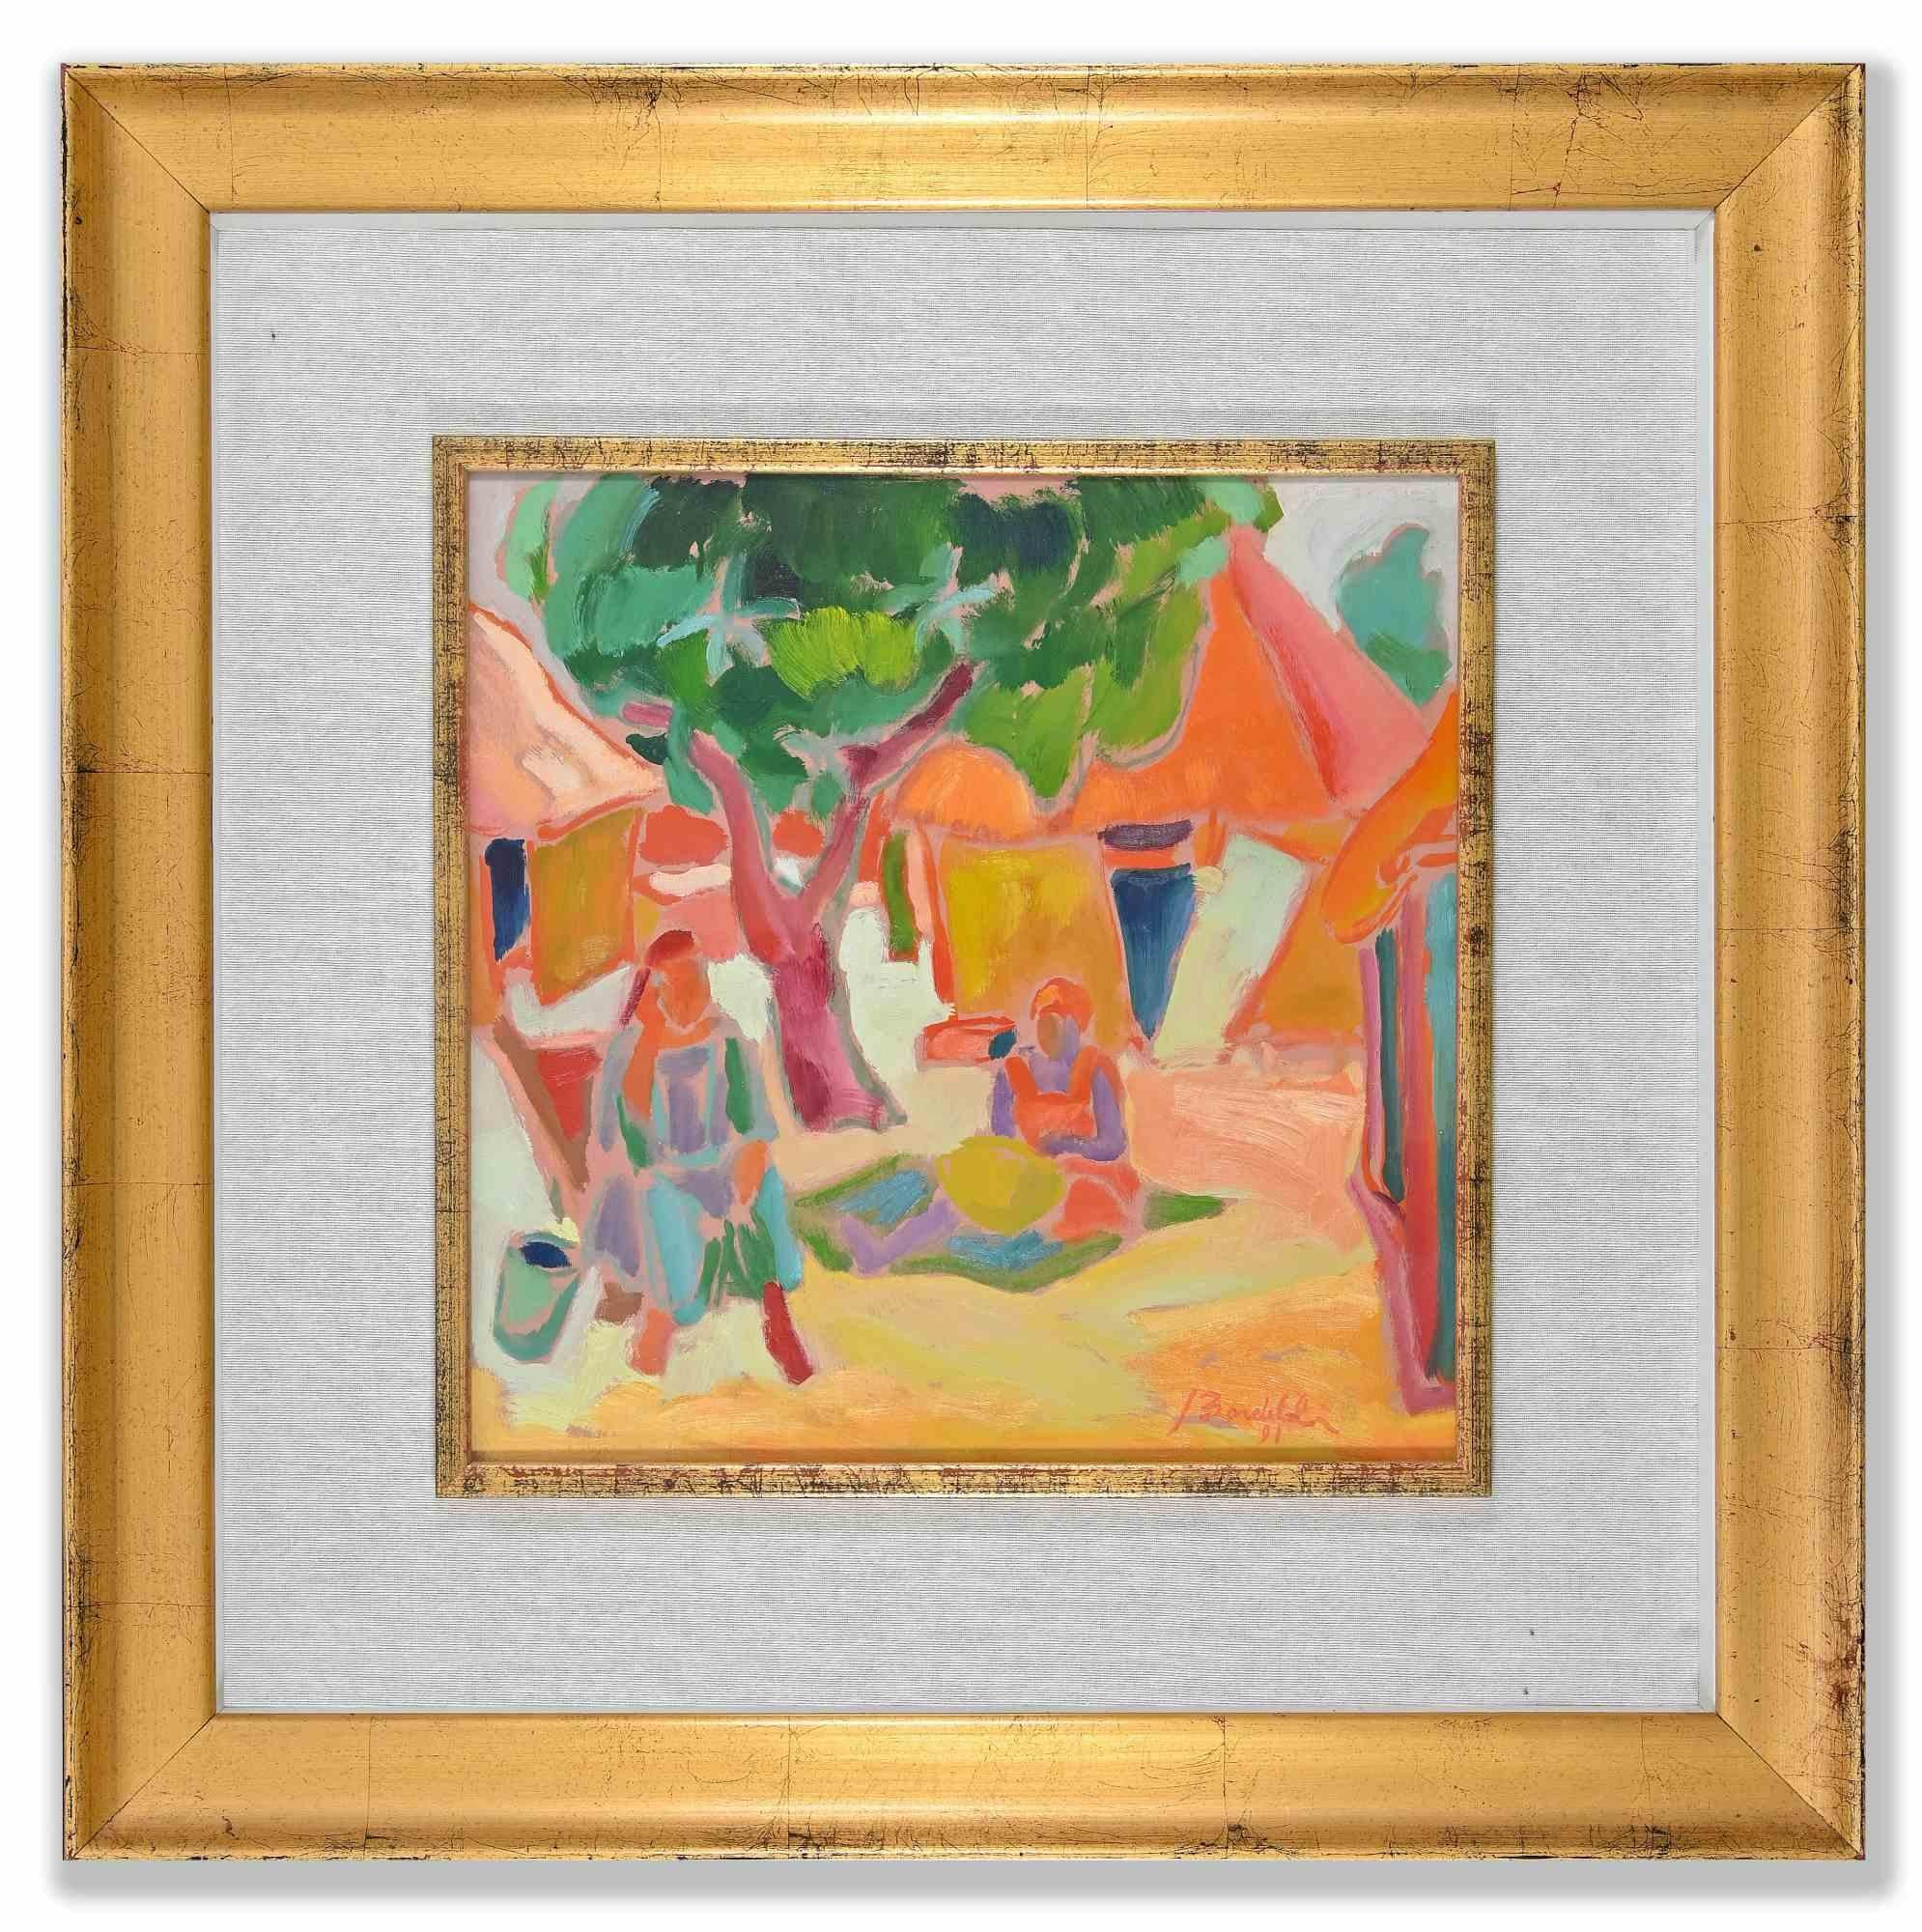 Senegalese Motif is an original contemporary artwork realized in 1991 by the artist Sandro Bardelli.

Mixed colore oil on panel.

Hand signed on the lower right margin.

Title, signature, date and technique on the back.

Includes frame: 60.5 x 5 x